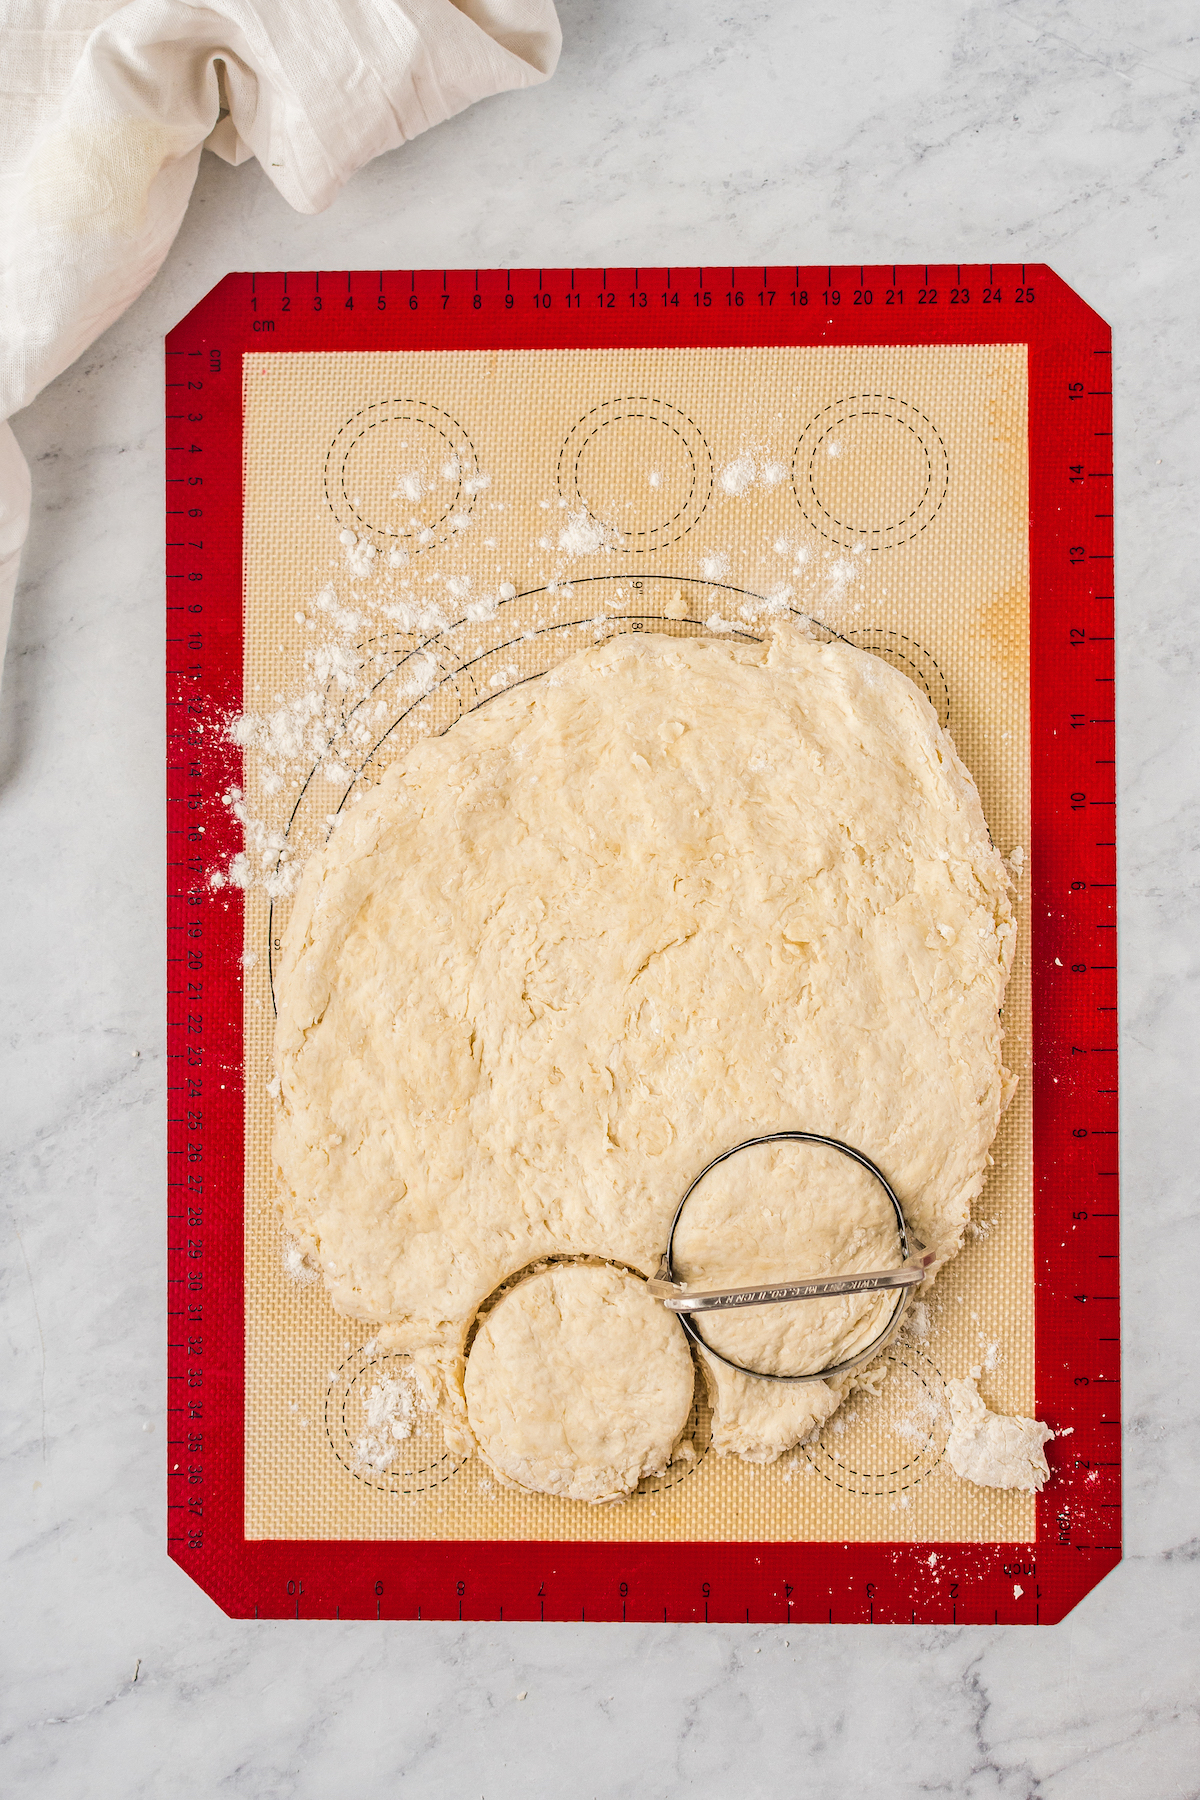 A circle of biscuit dough on a baking mat. One biscuit has been cut from the dough, and the biscuit cutter is resting on the remaining dough.